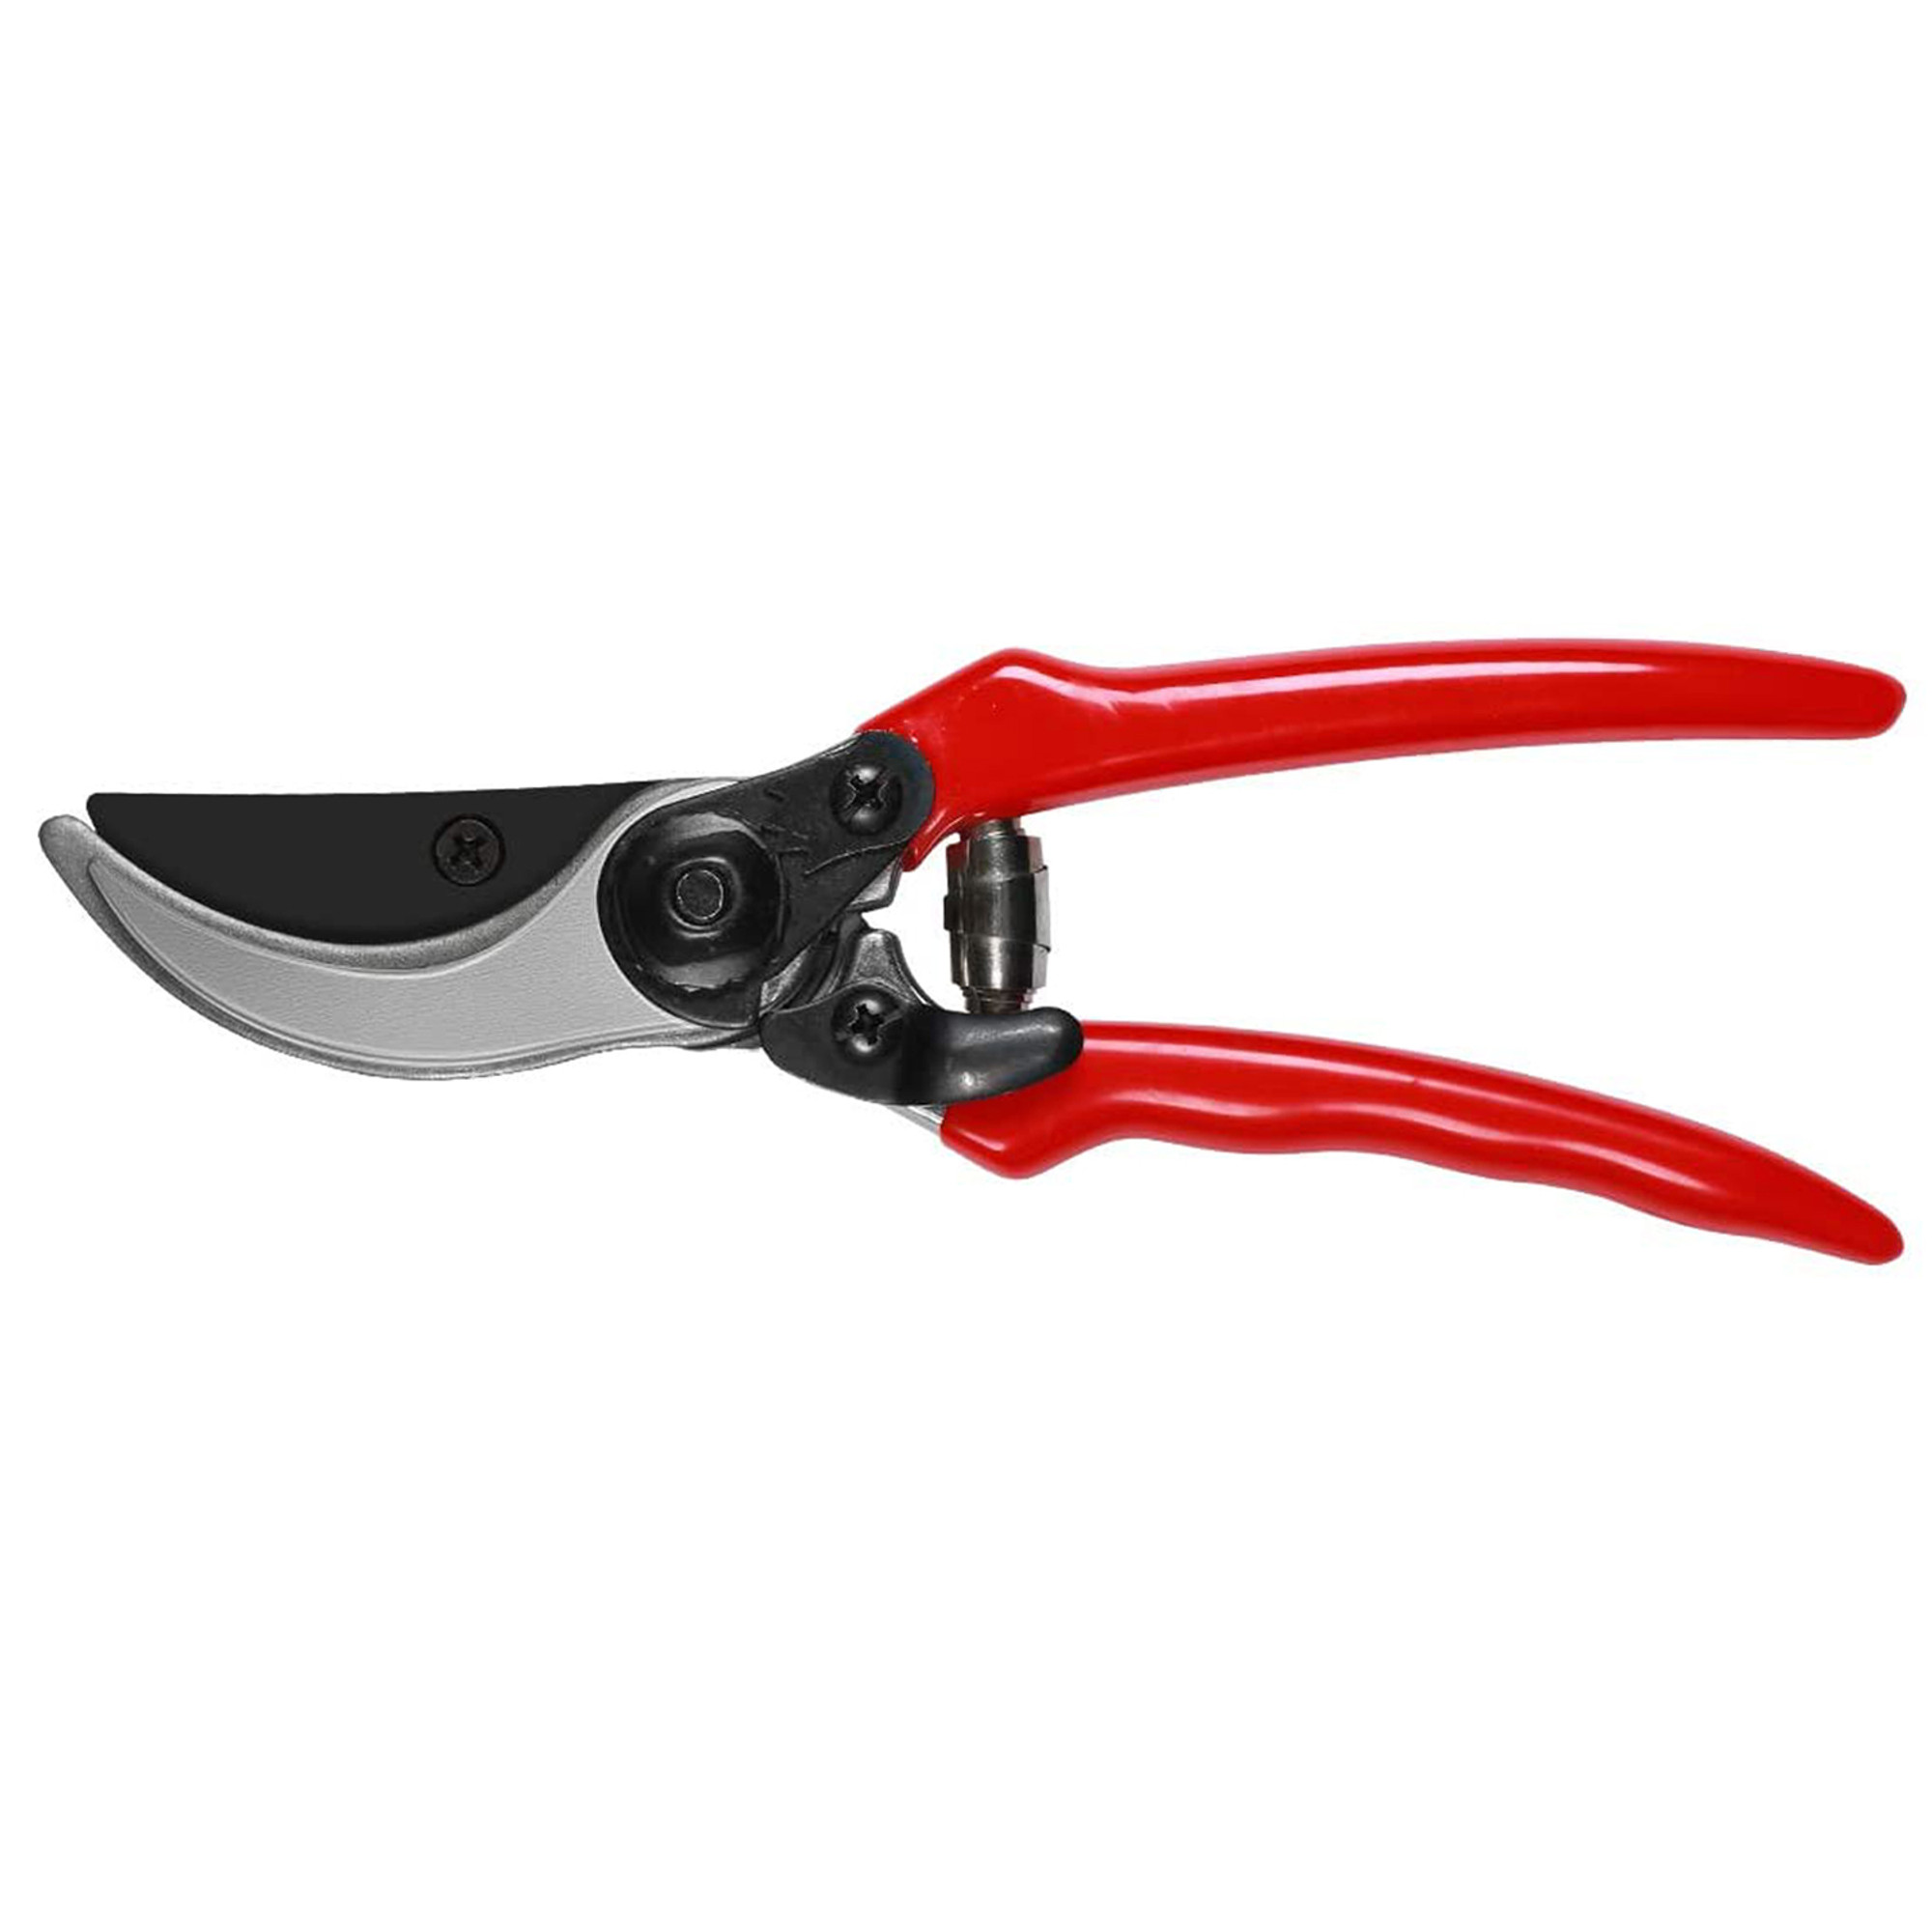 https://cdn11.bigcommerce.com/s-f0j9ofpmpu/images/stencil/2000x2000/products/219041/743696/7in%20professional%20garden%20hand%20pruners%20%20red__33348.1630607246.jpg?c=2